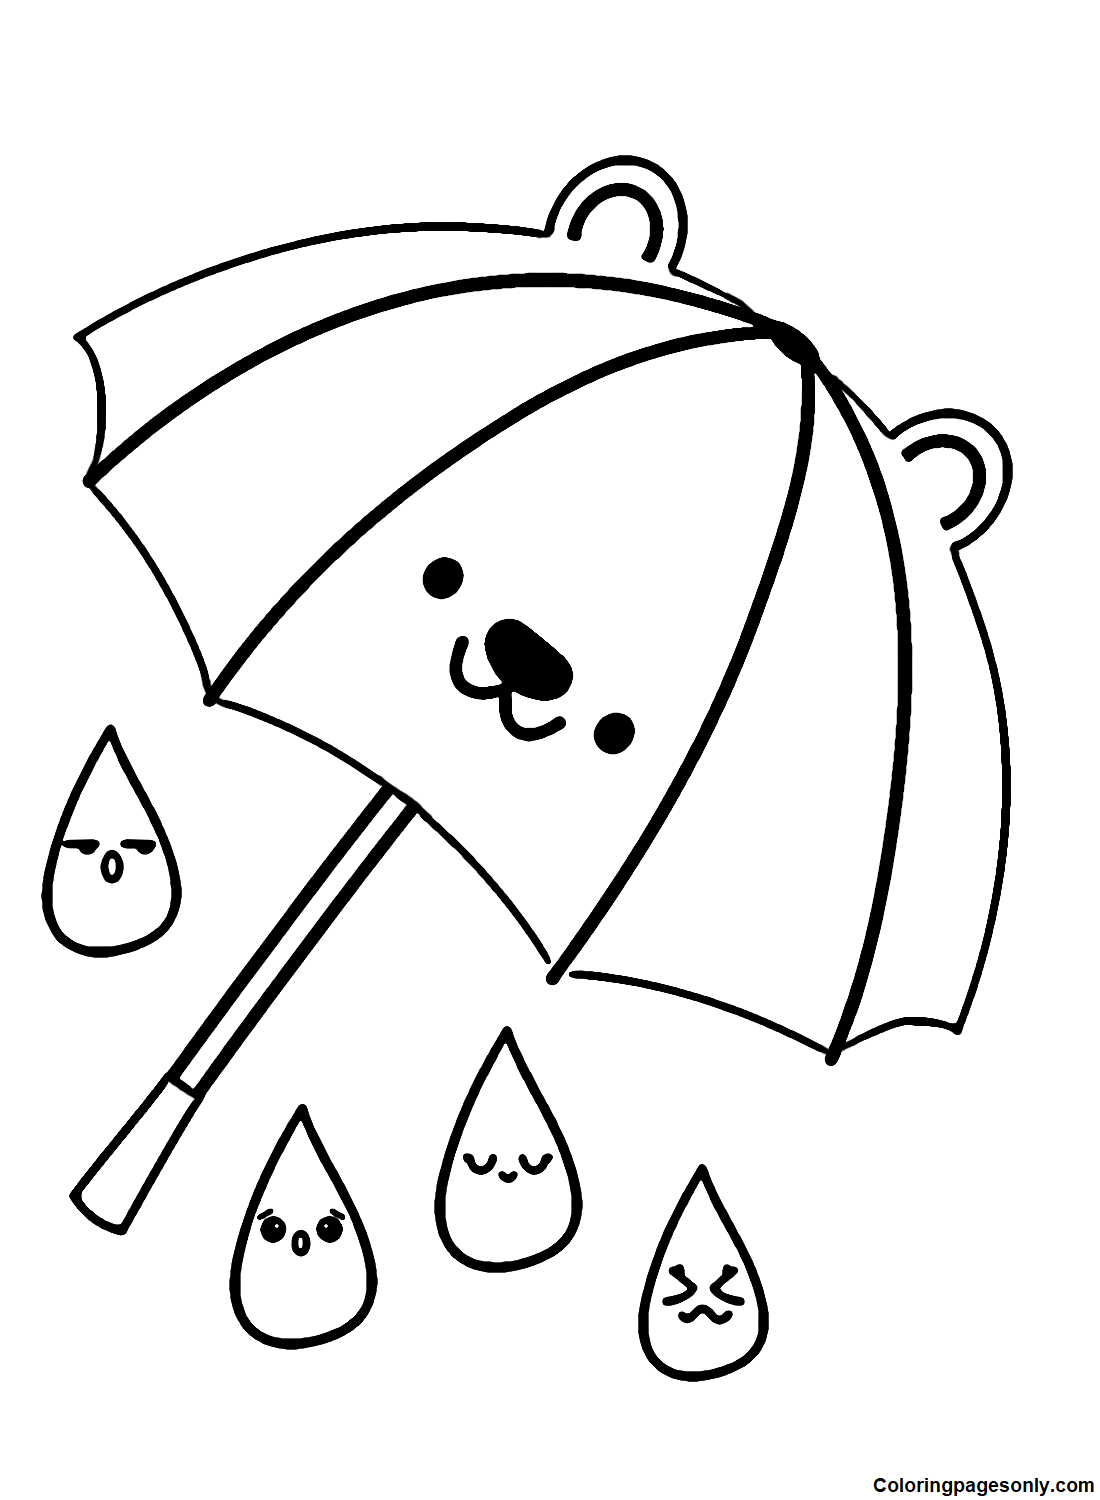 Umbrella with Ears Coloring Page